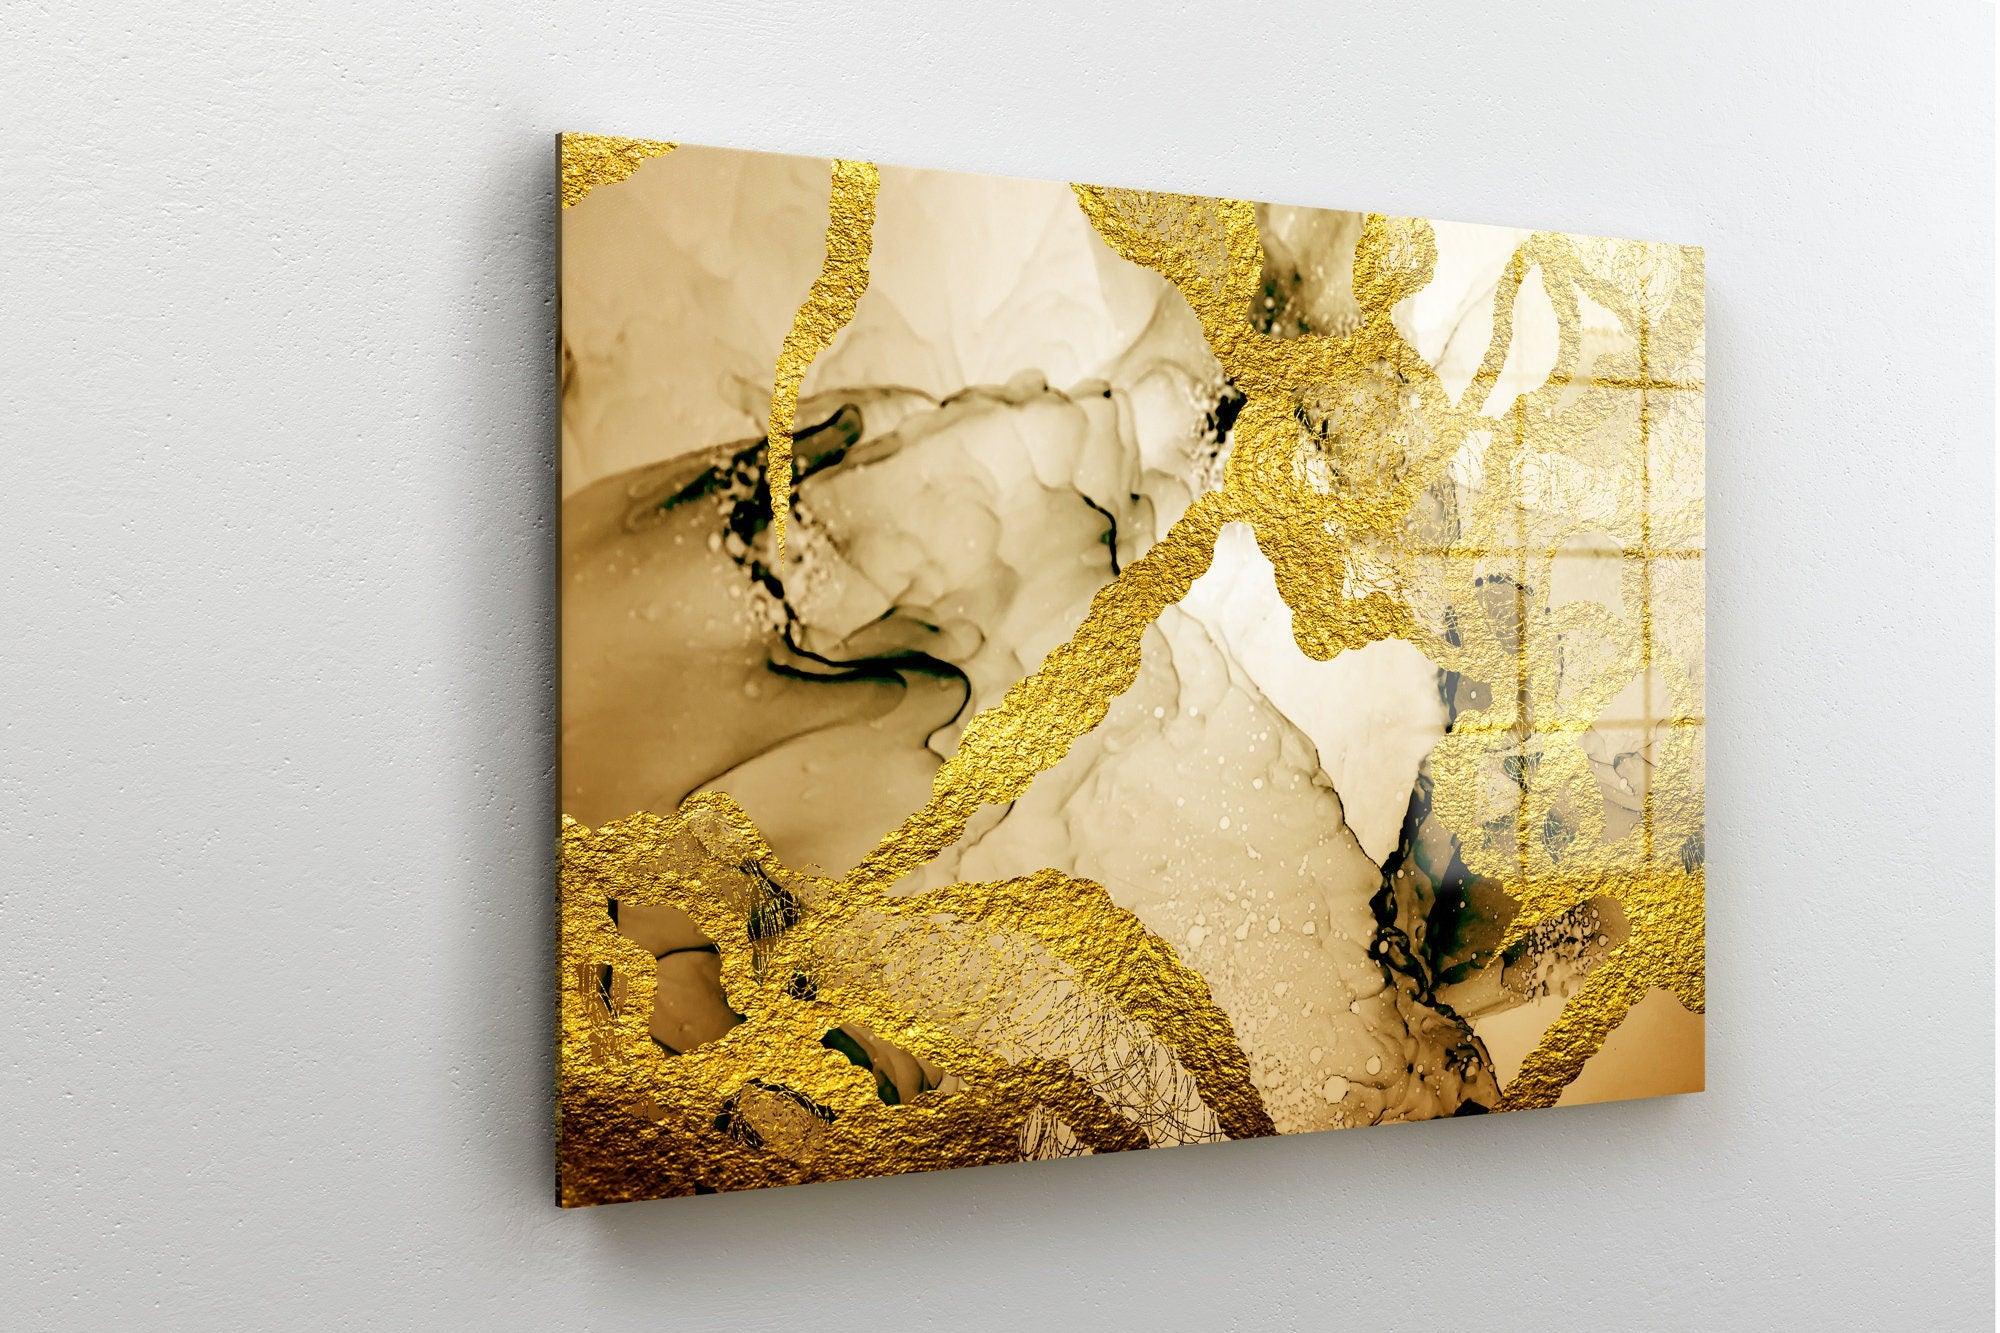 Gold Marble Wall Art| Gold glass Wall Art, Marble Wall Decor, Gold Wall Decor, Extra Large Wall Art, gold bedroom decor, white and gold - TrendiArt